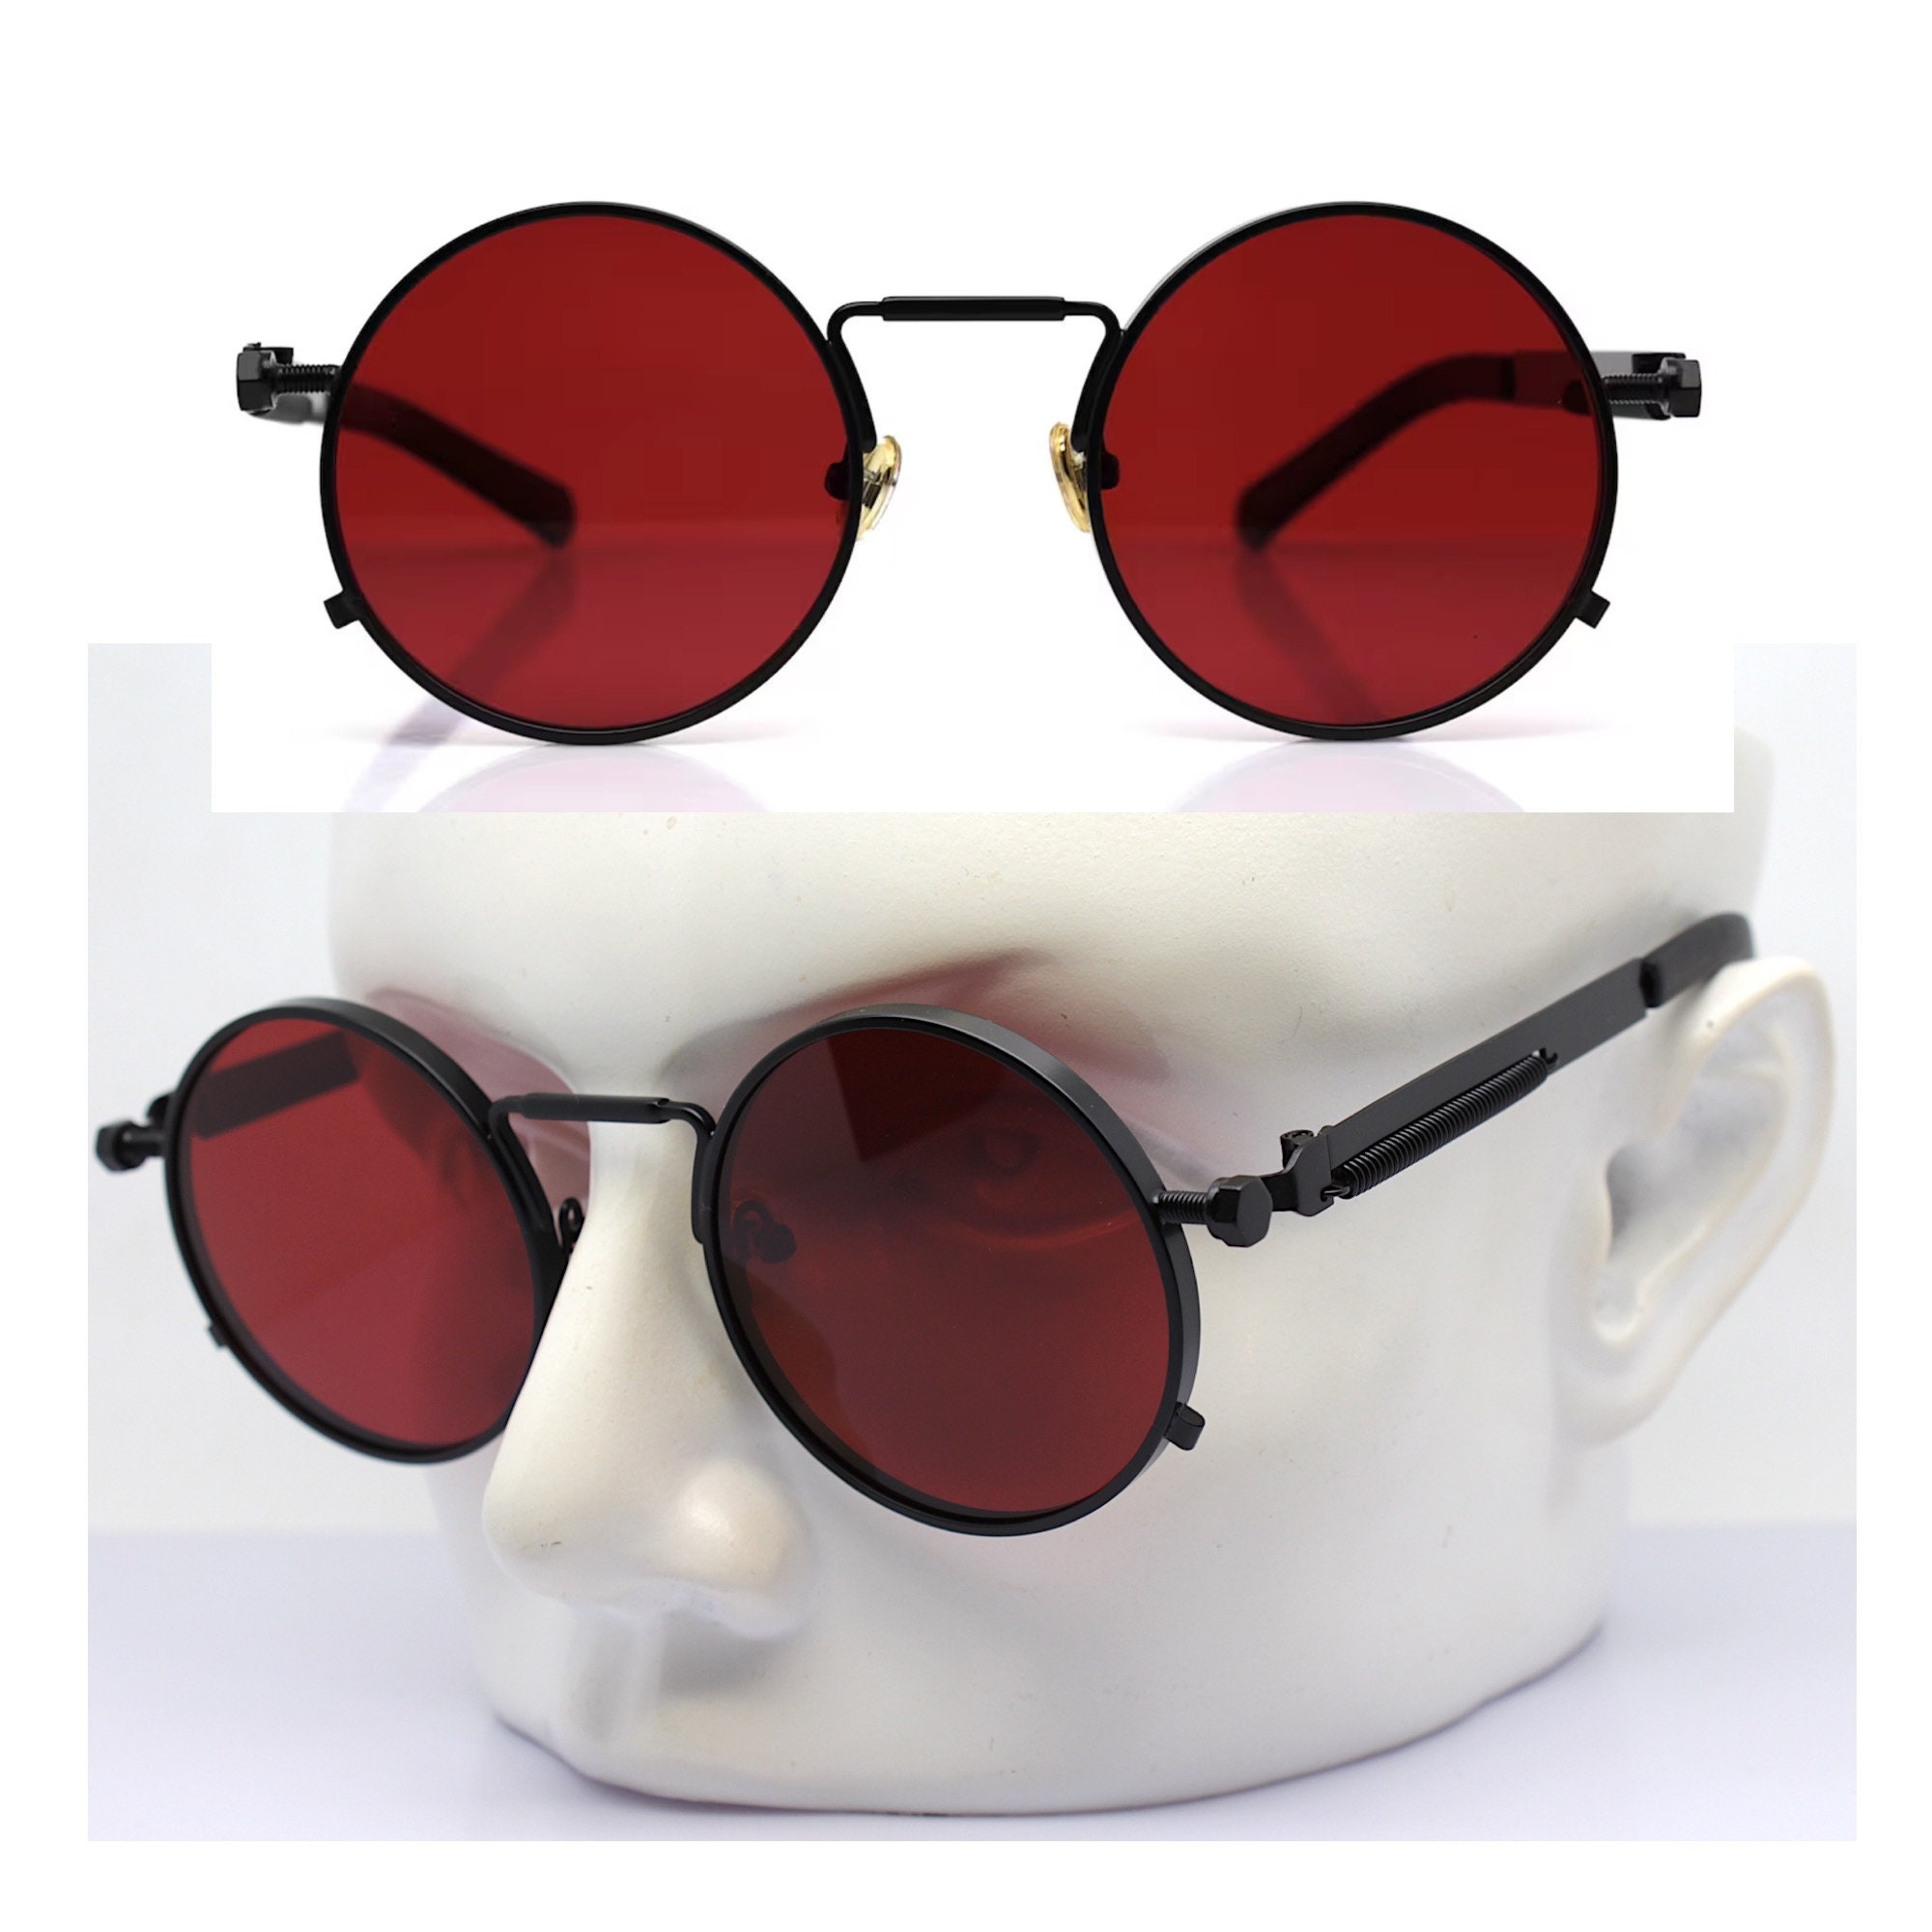 Red Lens Glasses for Women, Vampire Aesthetic Monocle for Men, Gothic Academia Whimsigoth Accessories, Goth Gifts for Her, Steampunk Fashion